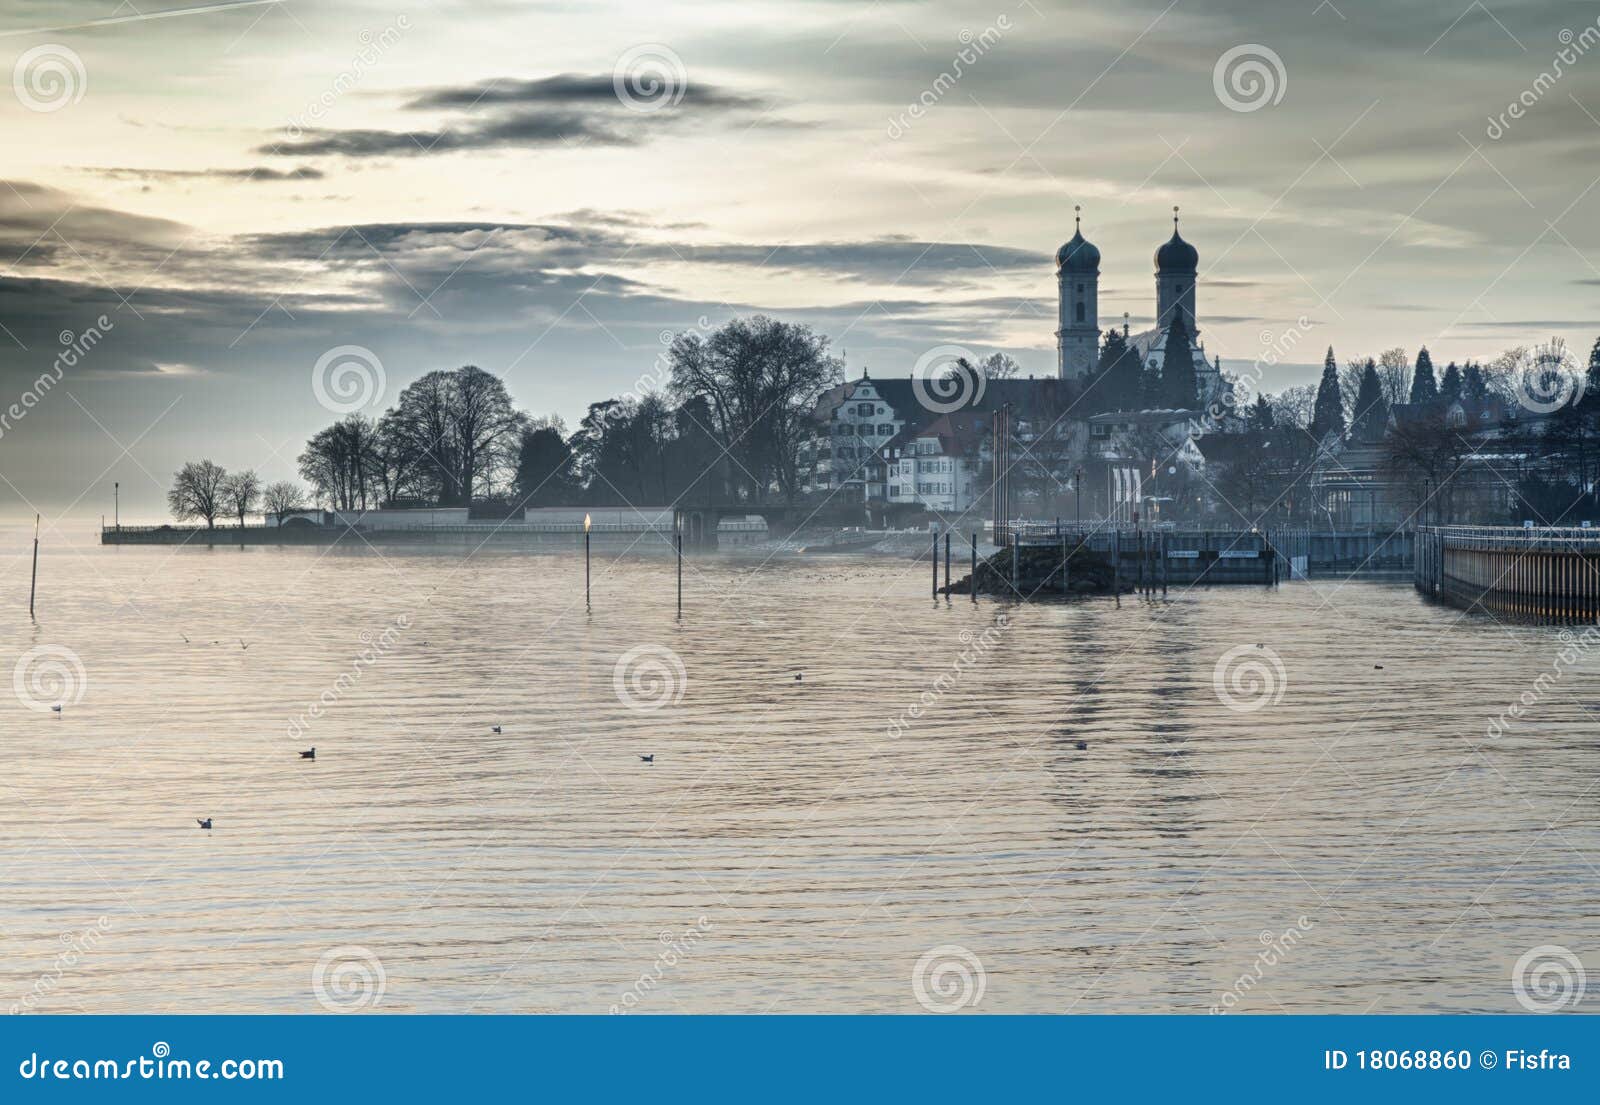 bodensee (lake constance)